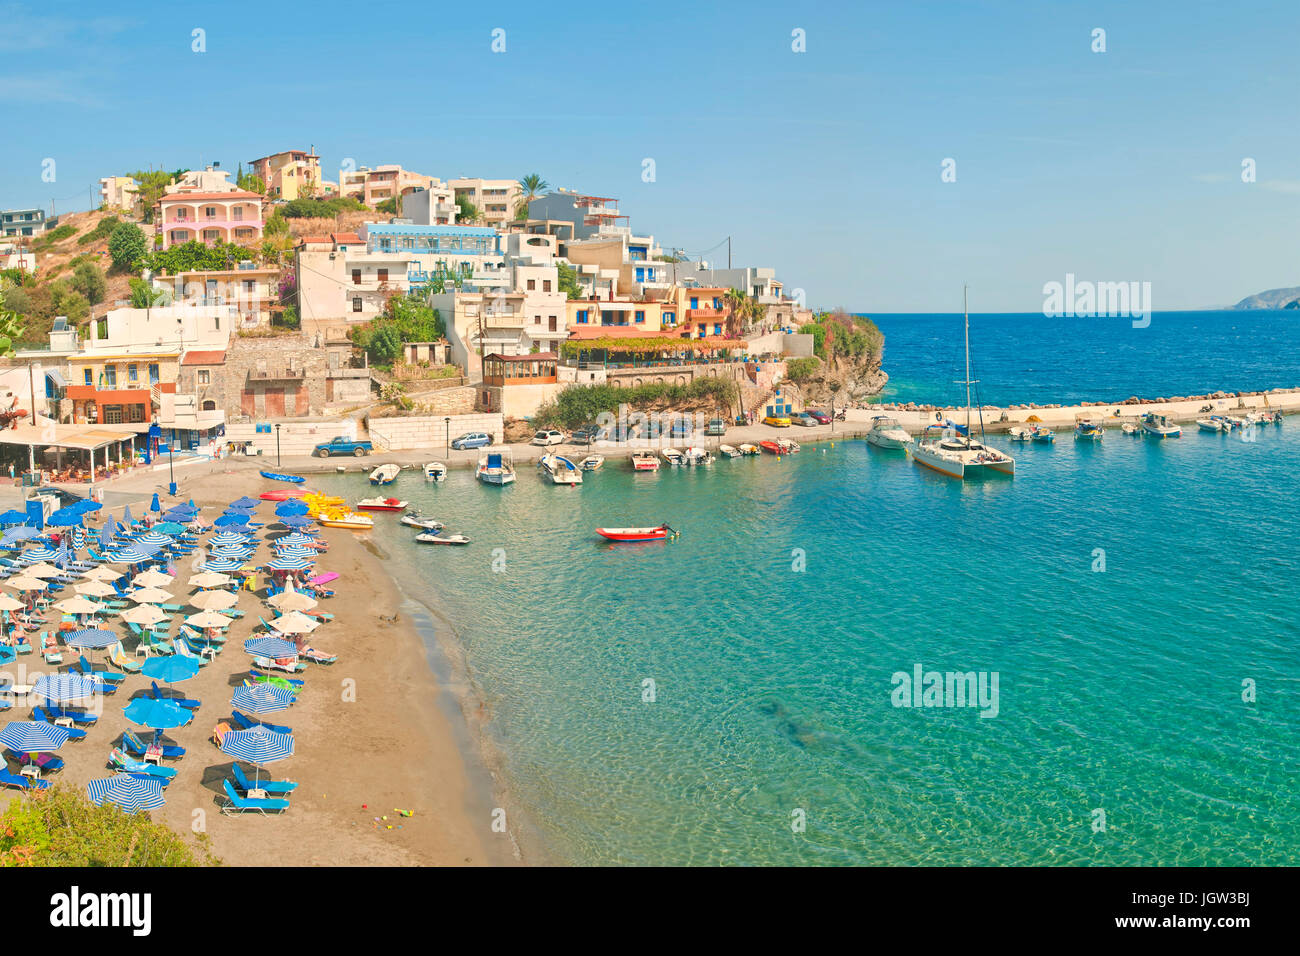 panoramic view of beach, houses and marina of small Greek town by Mediterranean sea, Bali, Crete, Greece Stock Photo